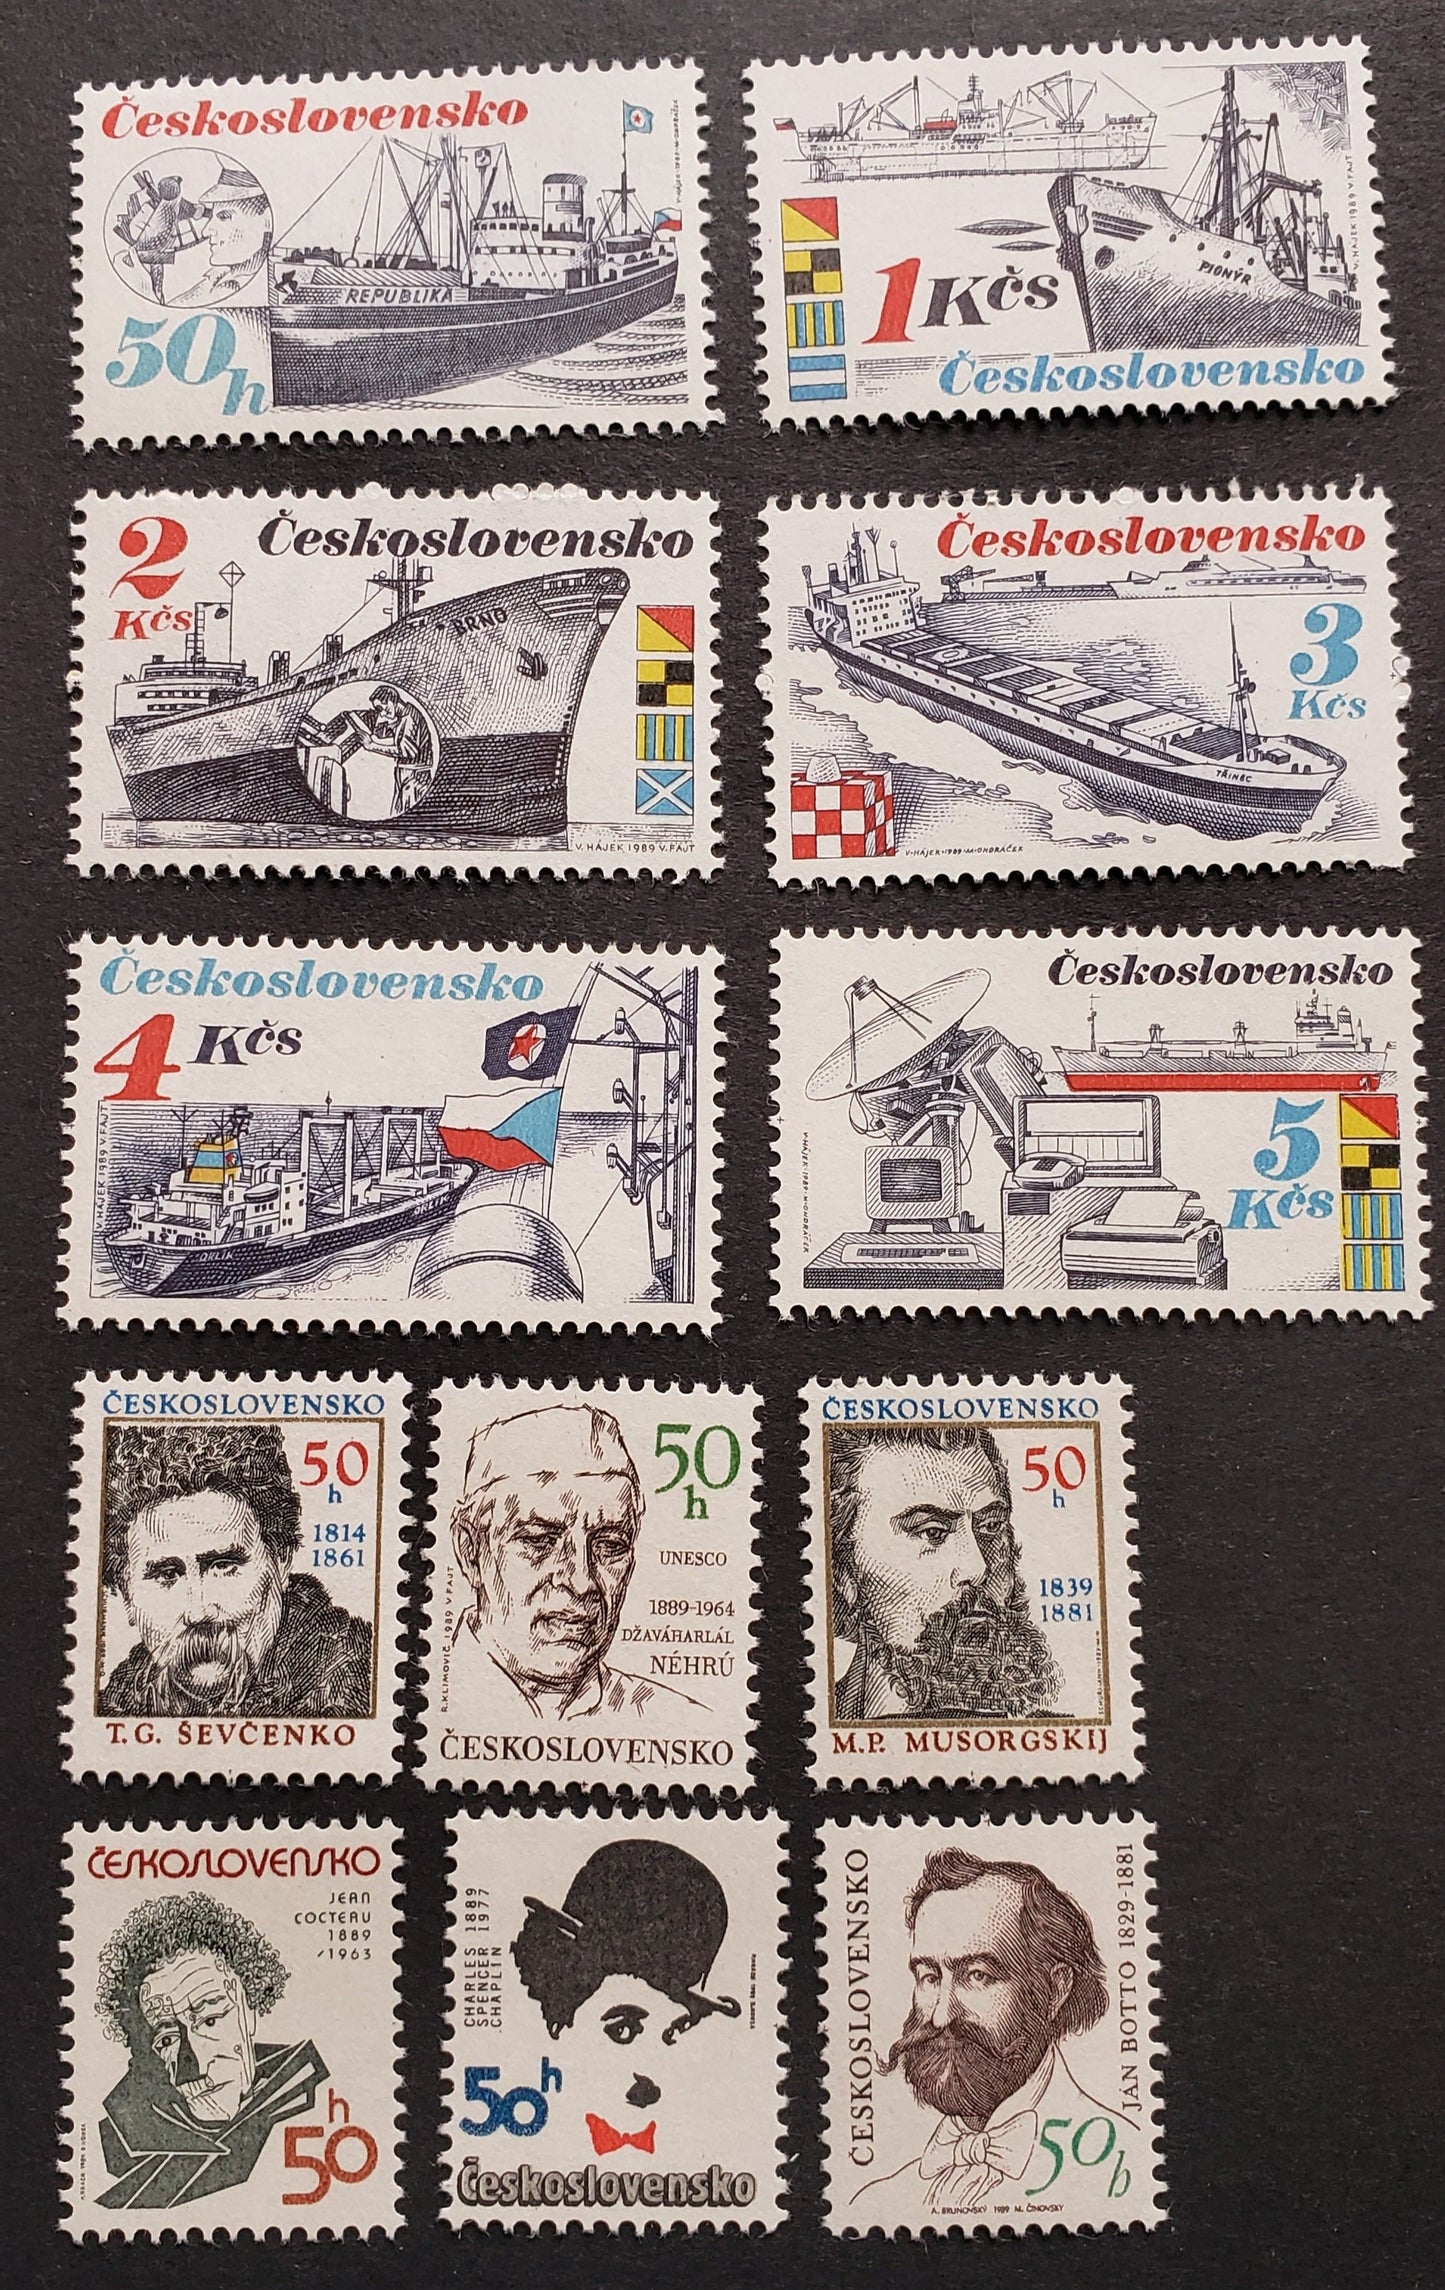 Lot 99 Czechoslovakia SC#2730-2741 1989 Famous Men - Shipping Industry, 12 VFNH Singles, Click on Listing to See ALL Pictures, 2017 Scott Cat. $4.75